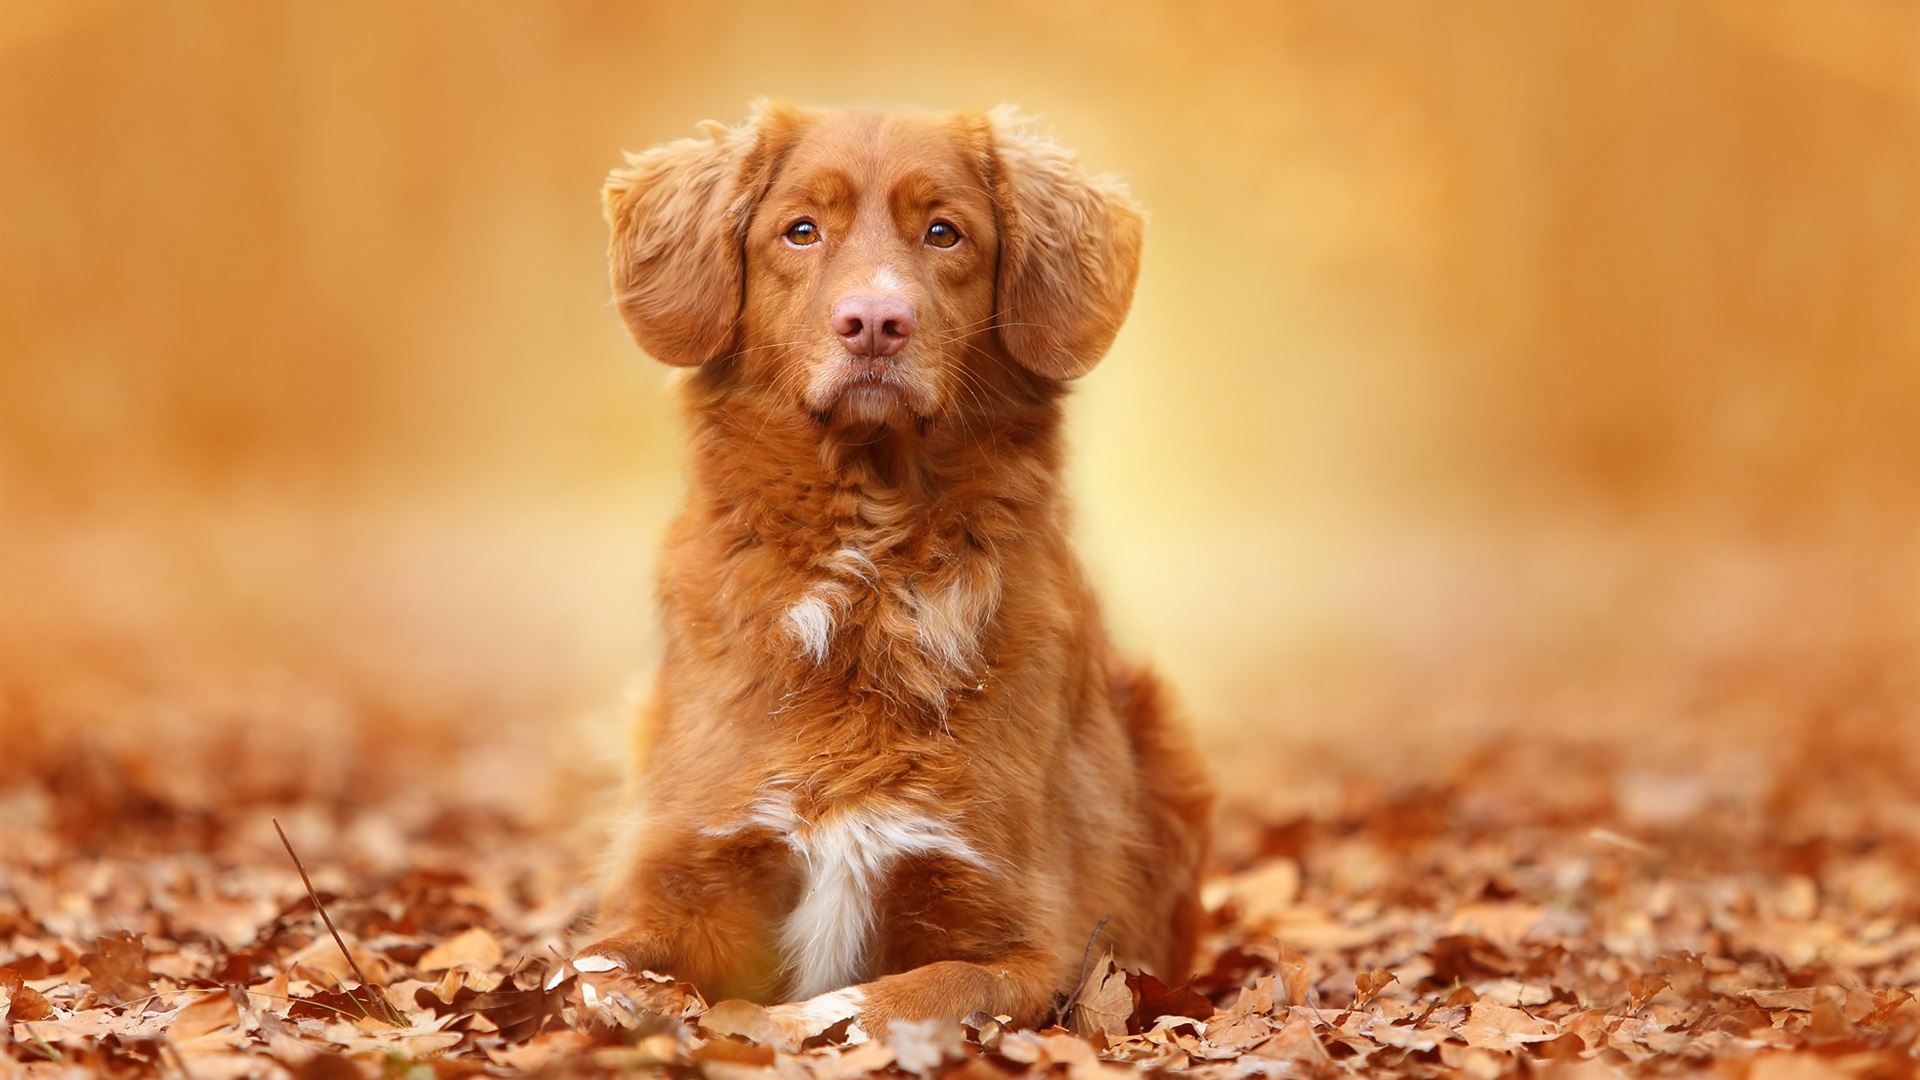 General 1920x1080 dog animals nature leaves fall frontal view